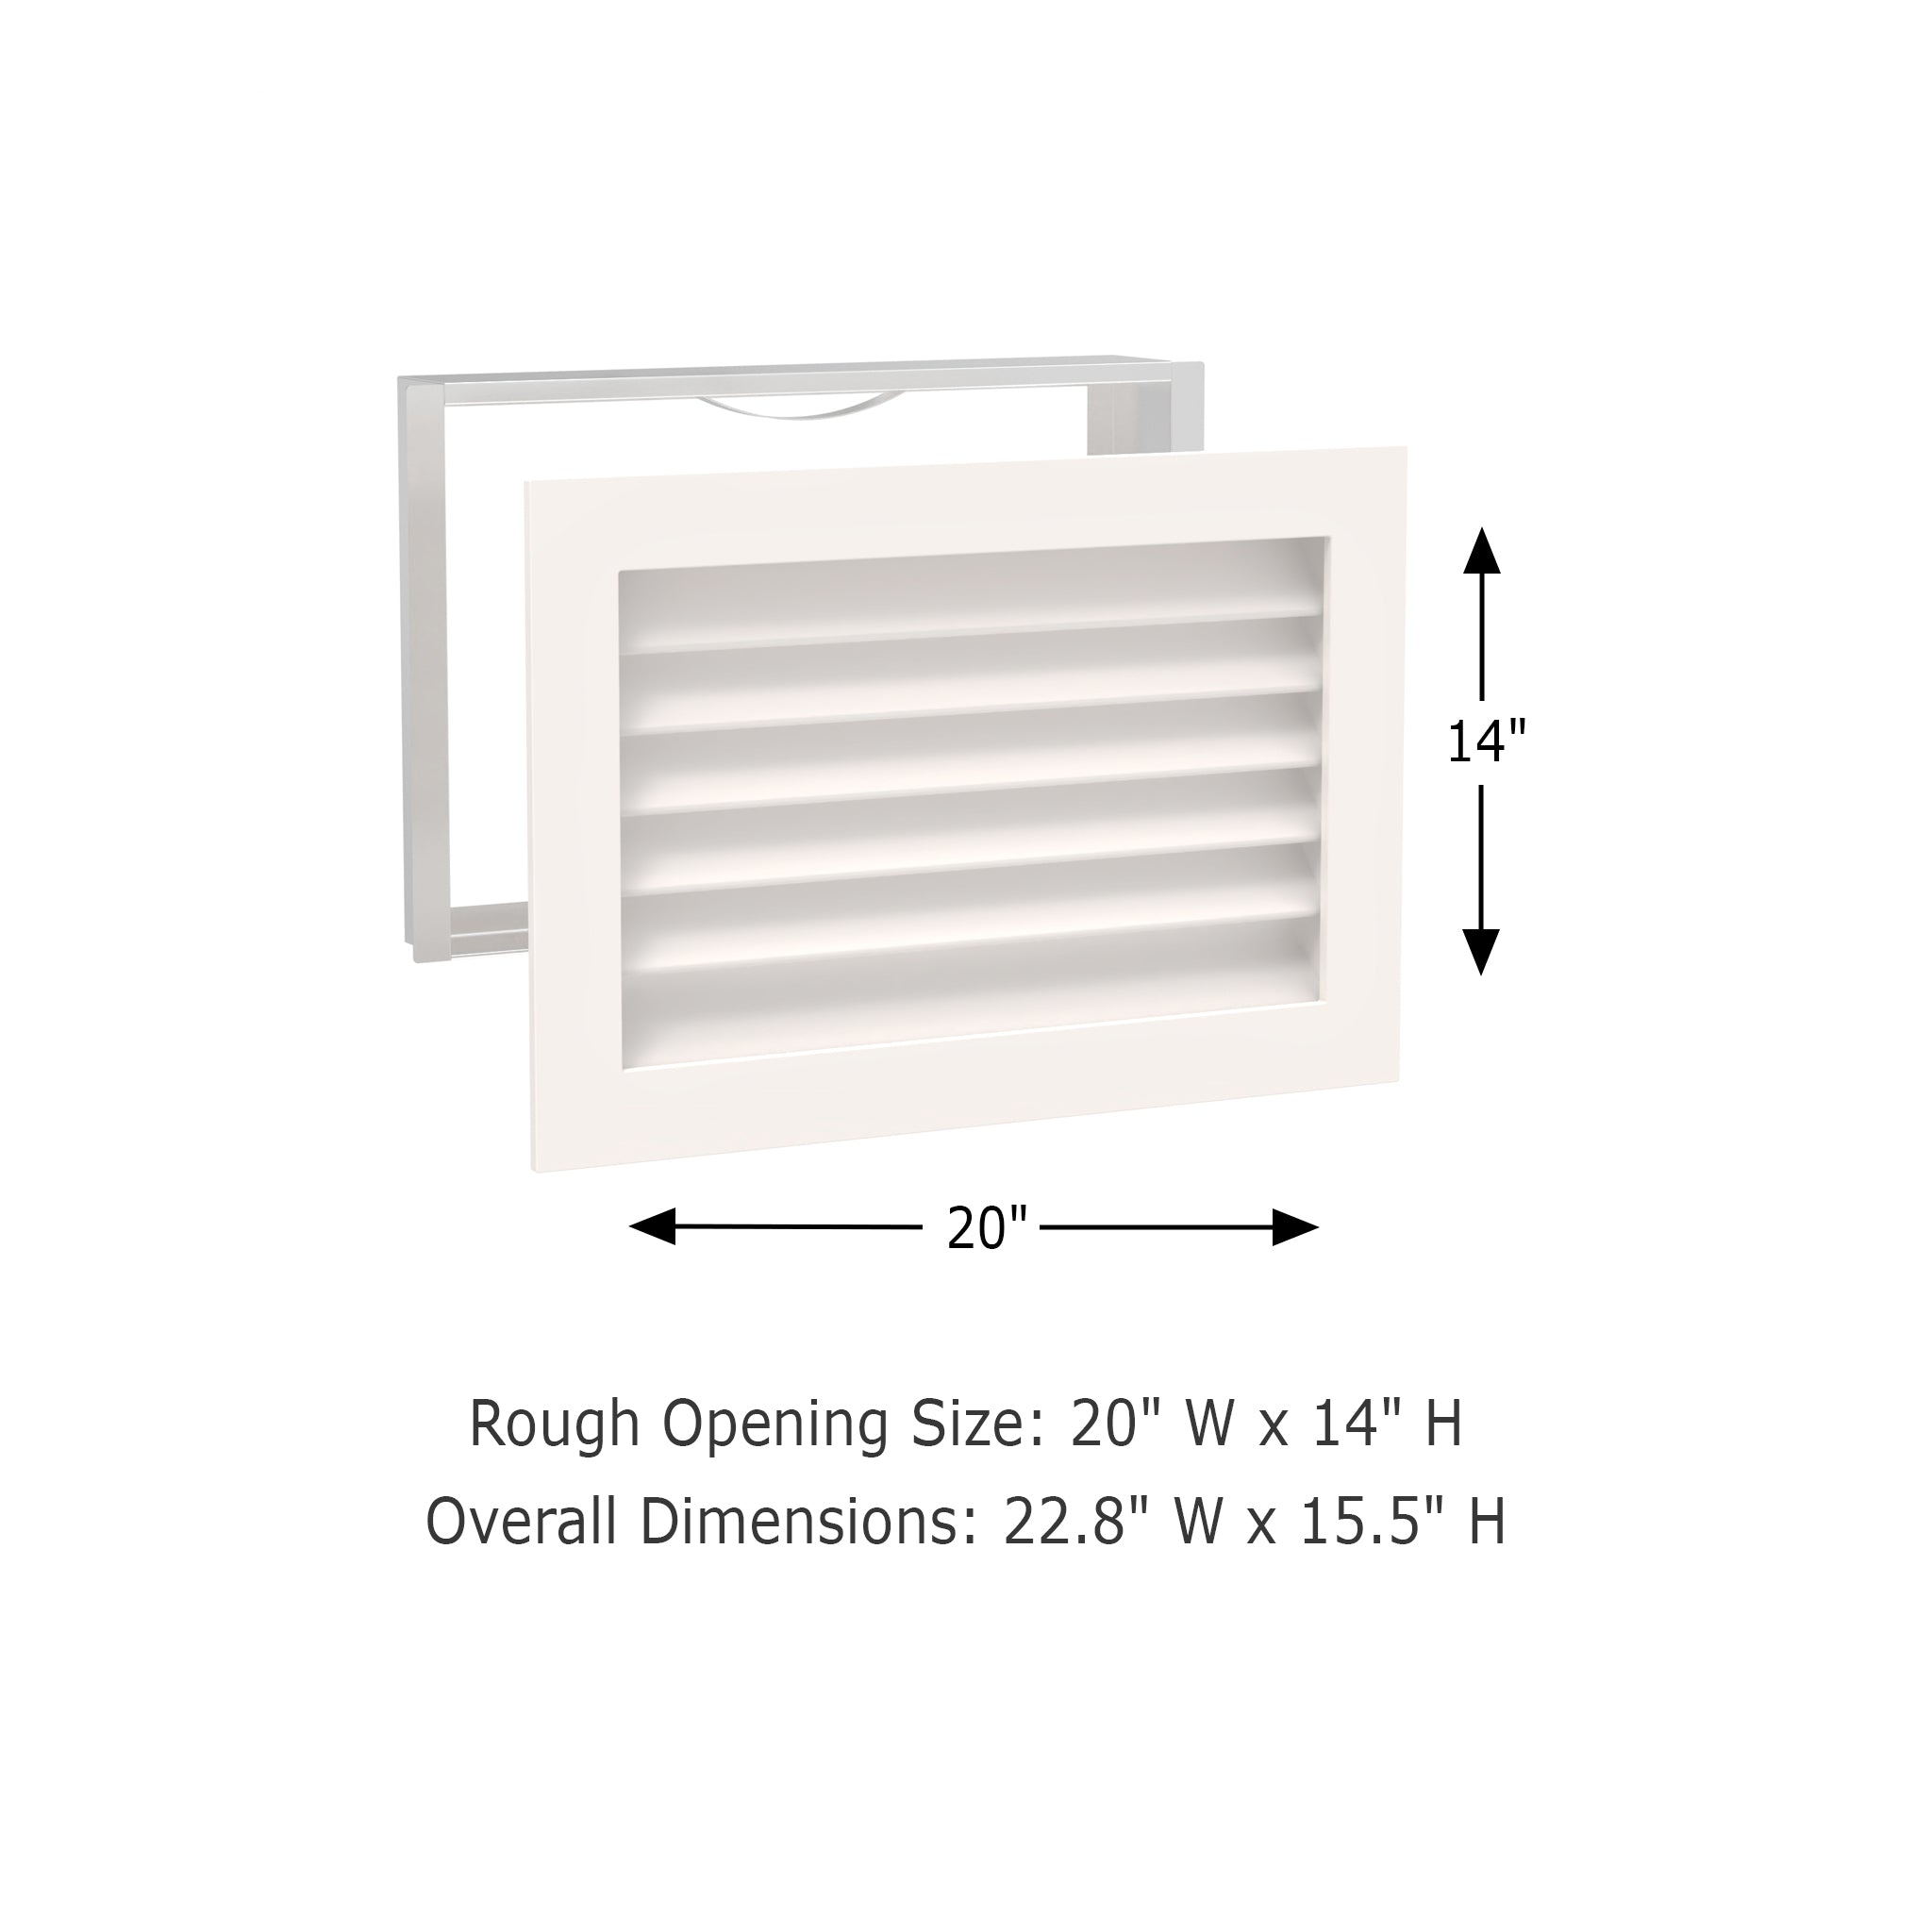 Worth Home Products - decorative wood AC vent covers luxury return vent - Primed Wood Louvers 20x14